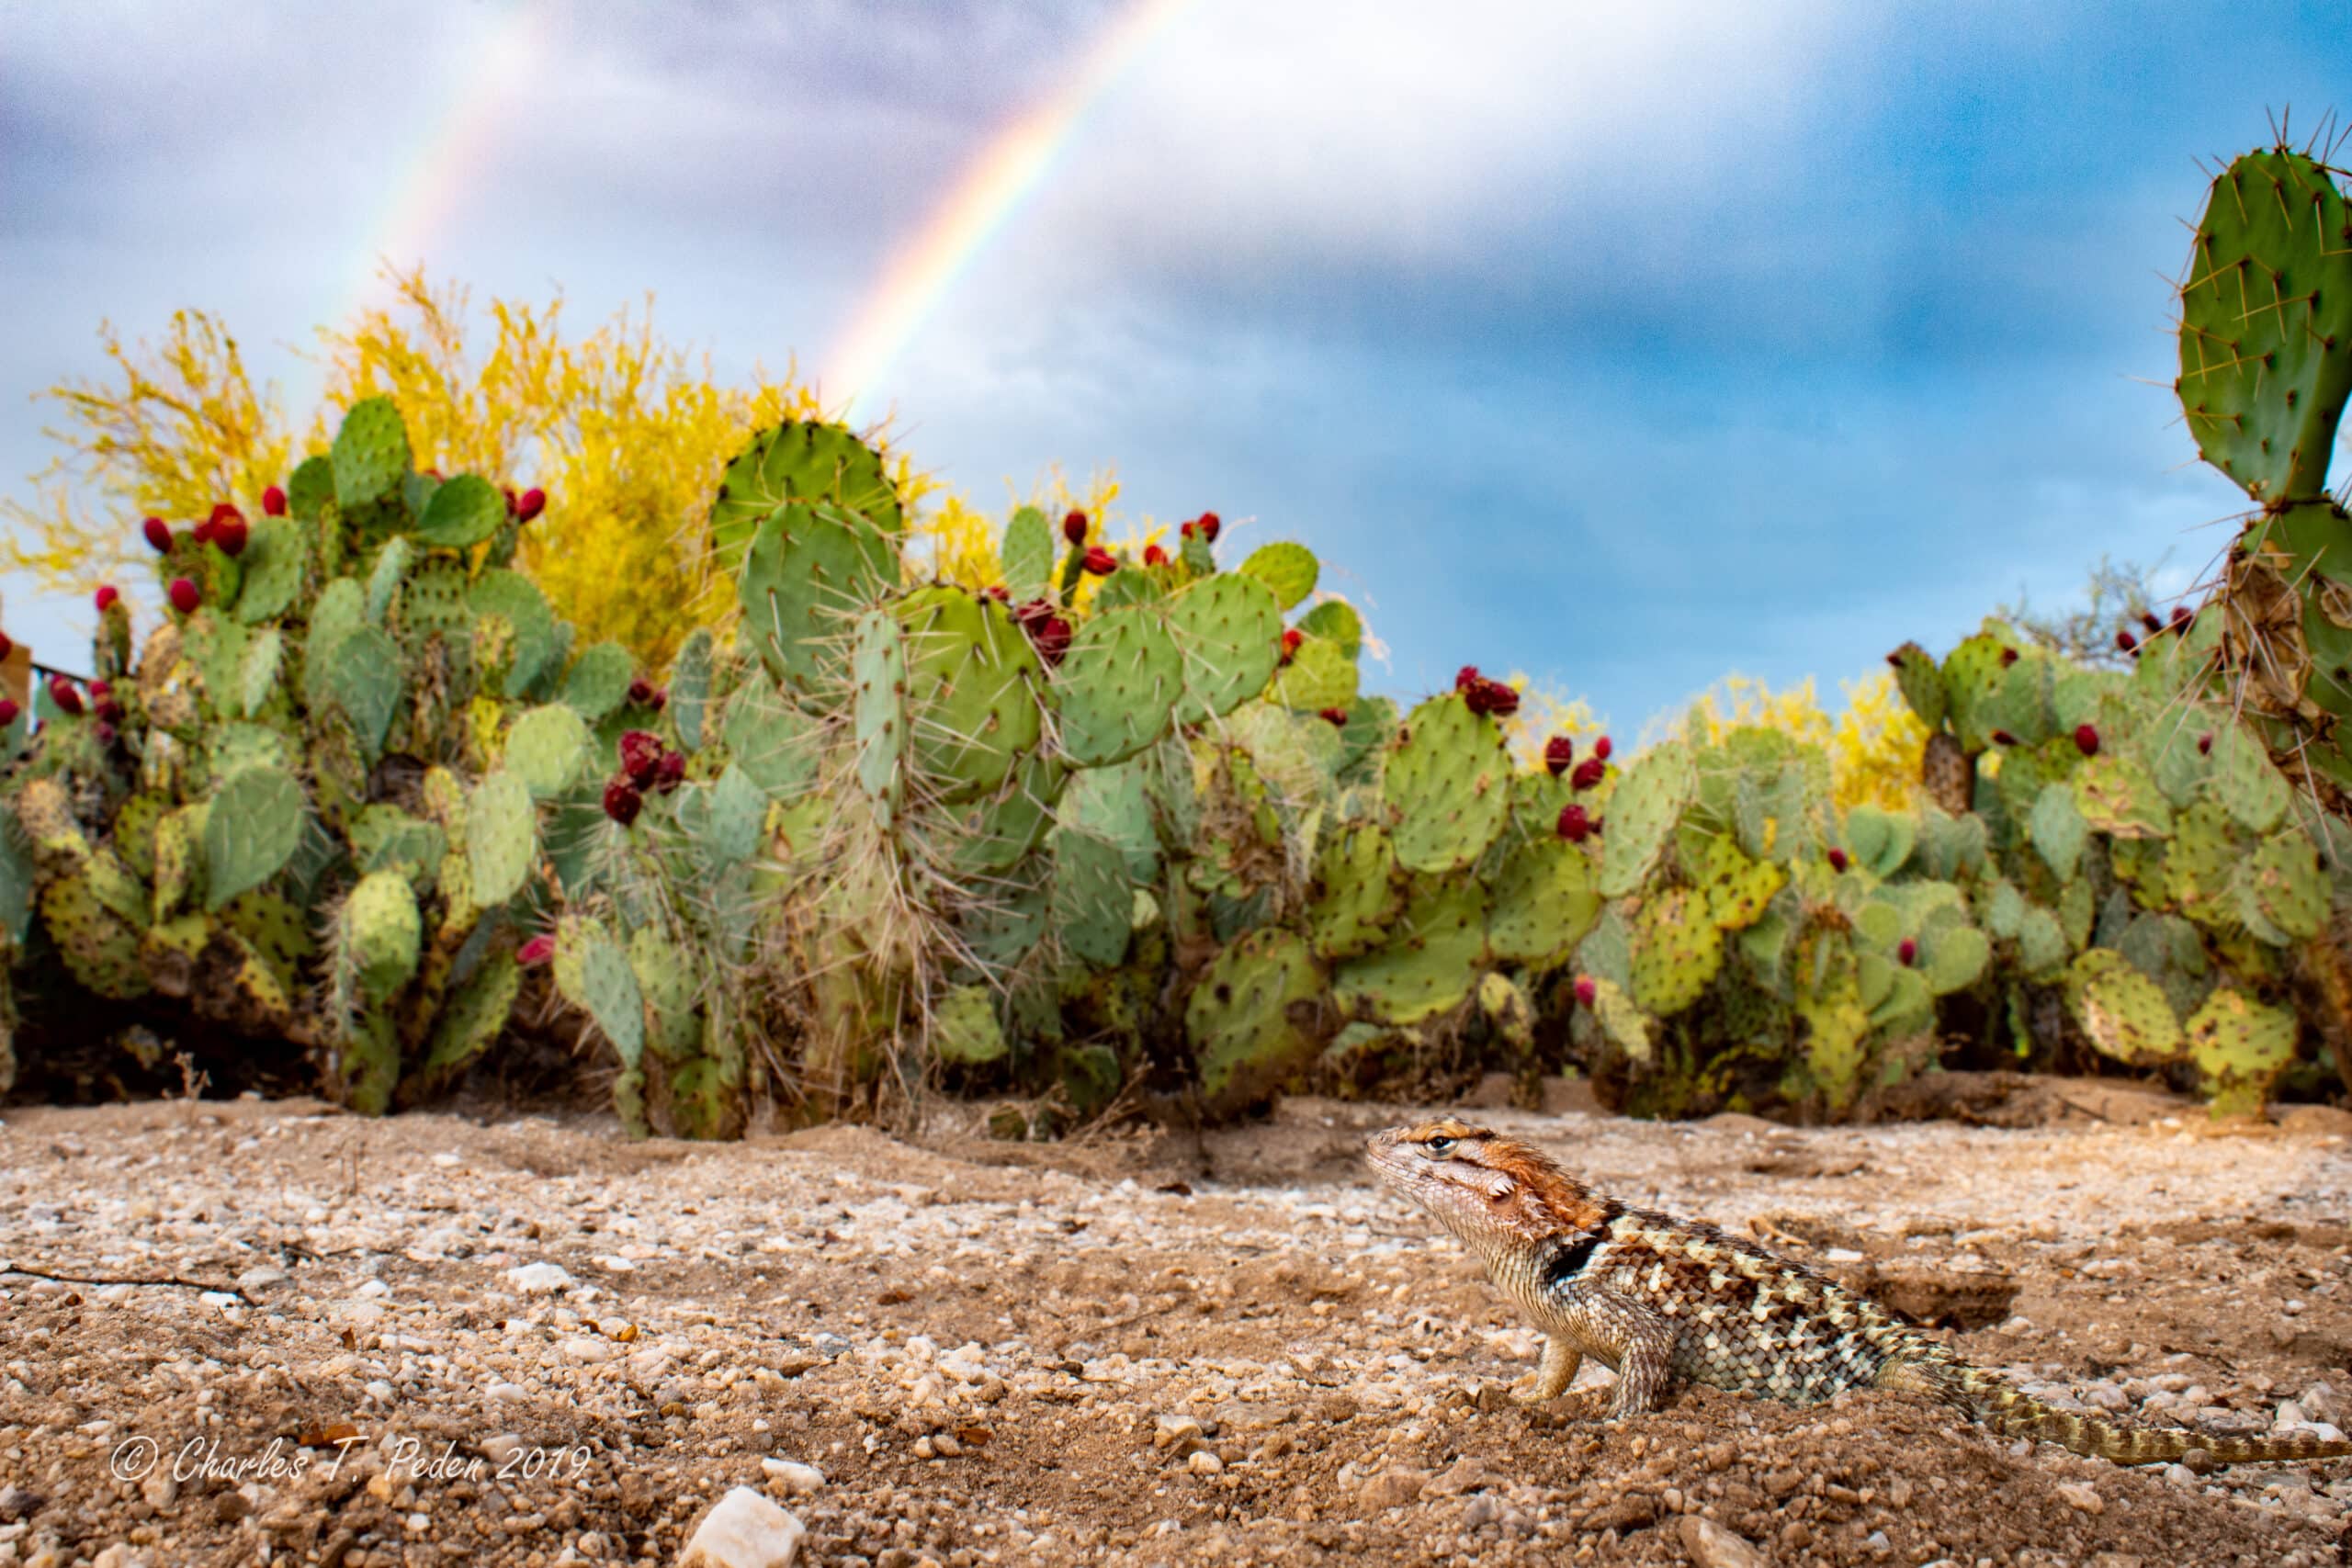 Female desert spiny lizard with prickly pear cactus and a rainbow.